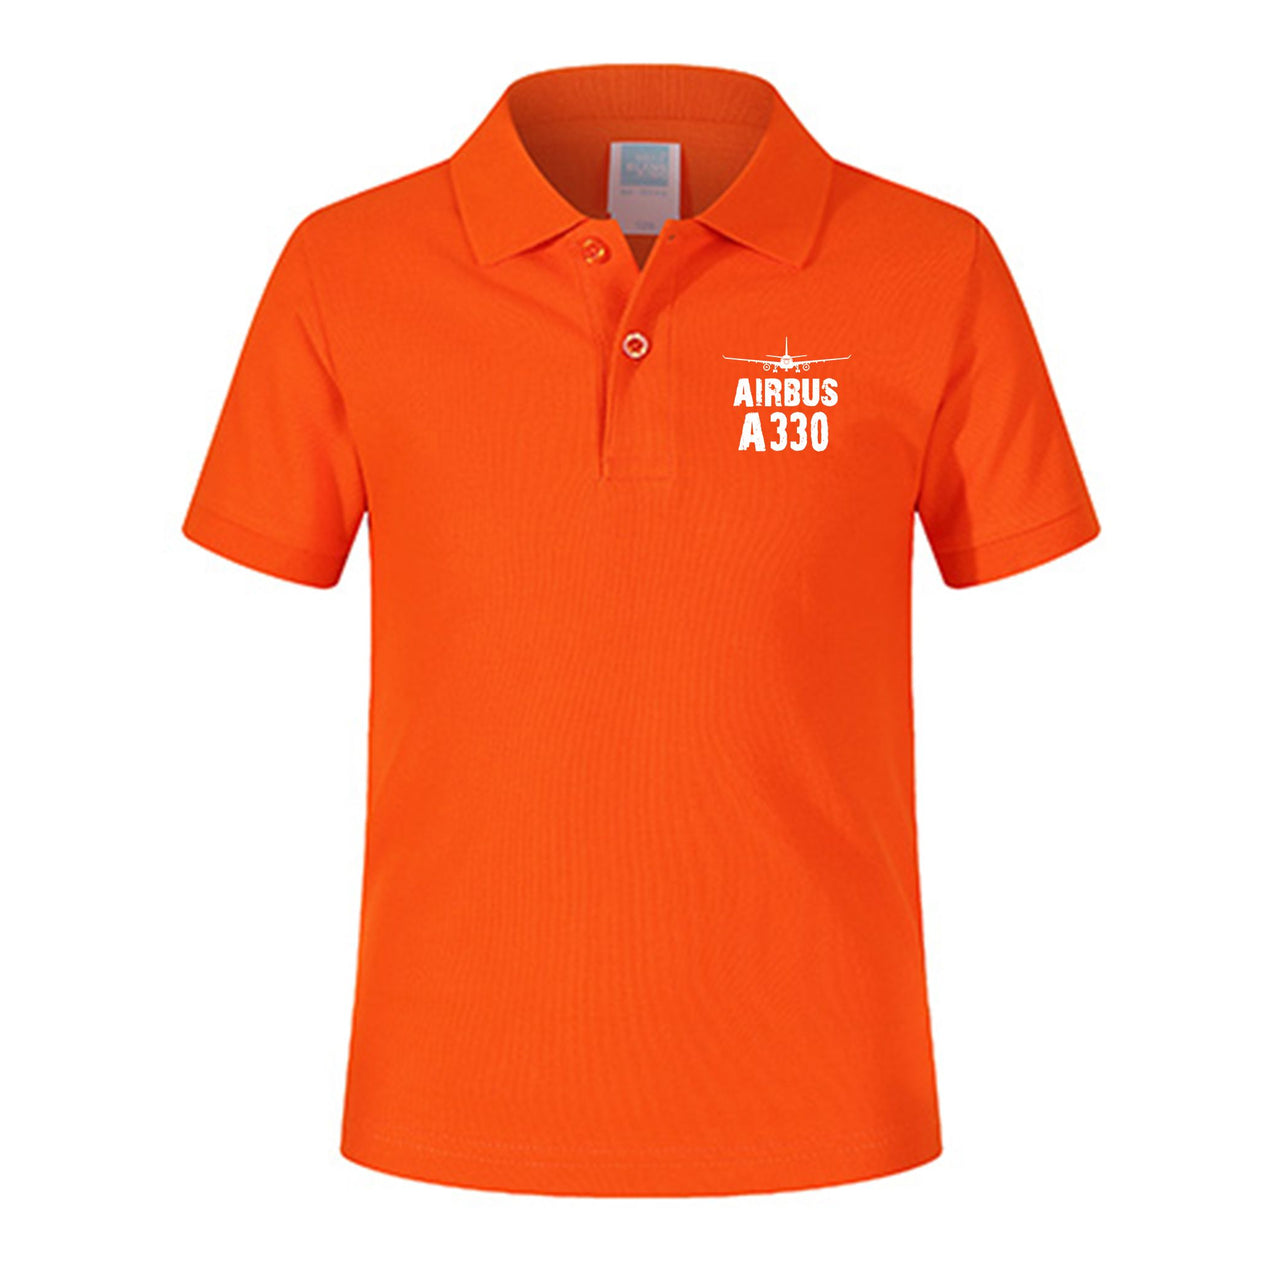 Airbus A330 & Plane Designed Children Polo T-Shirts